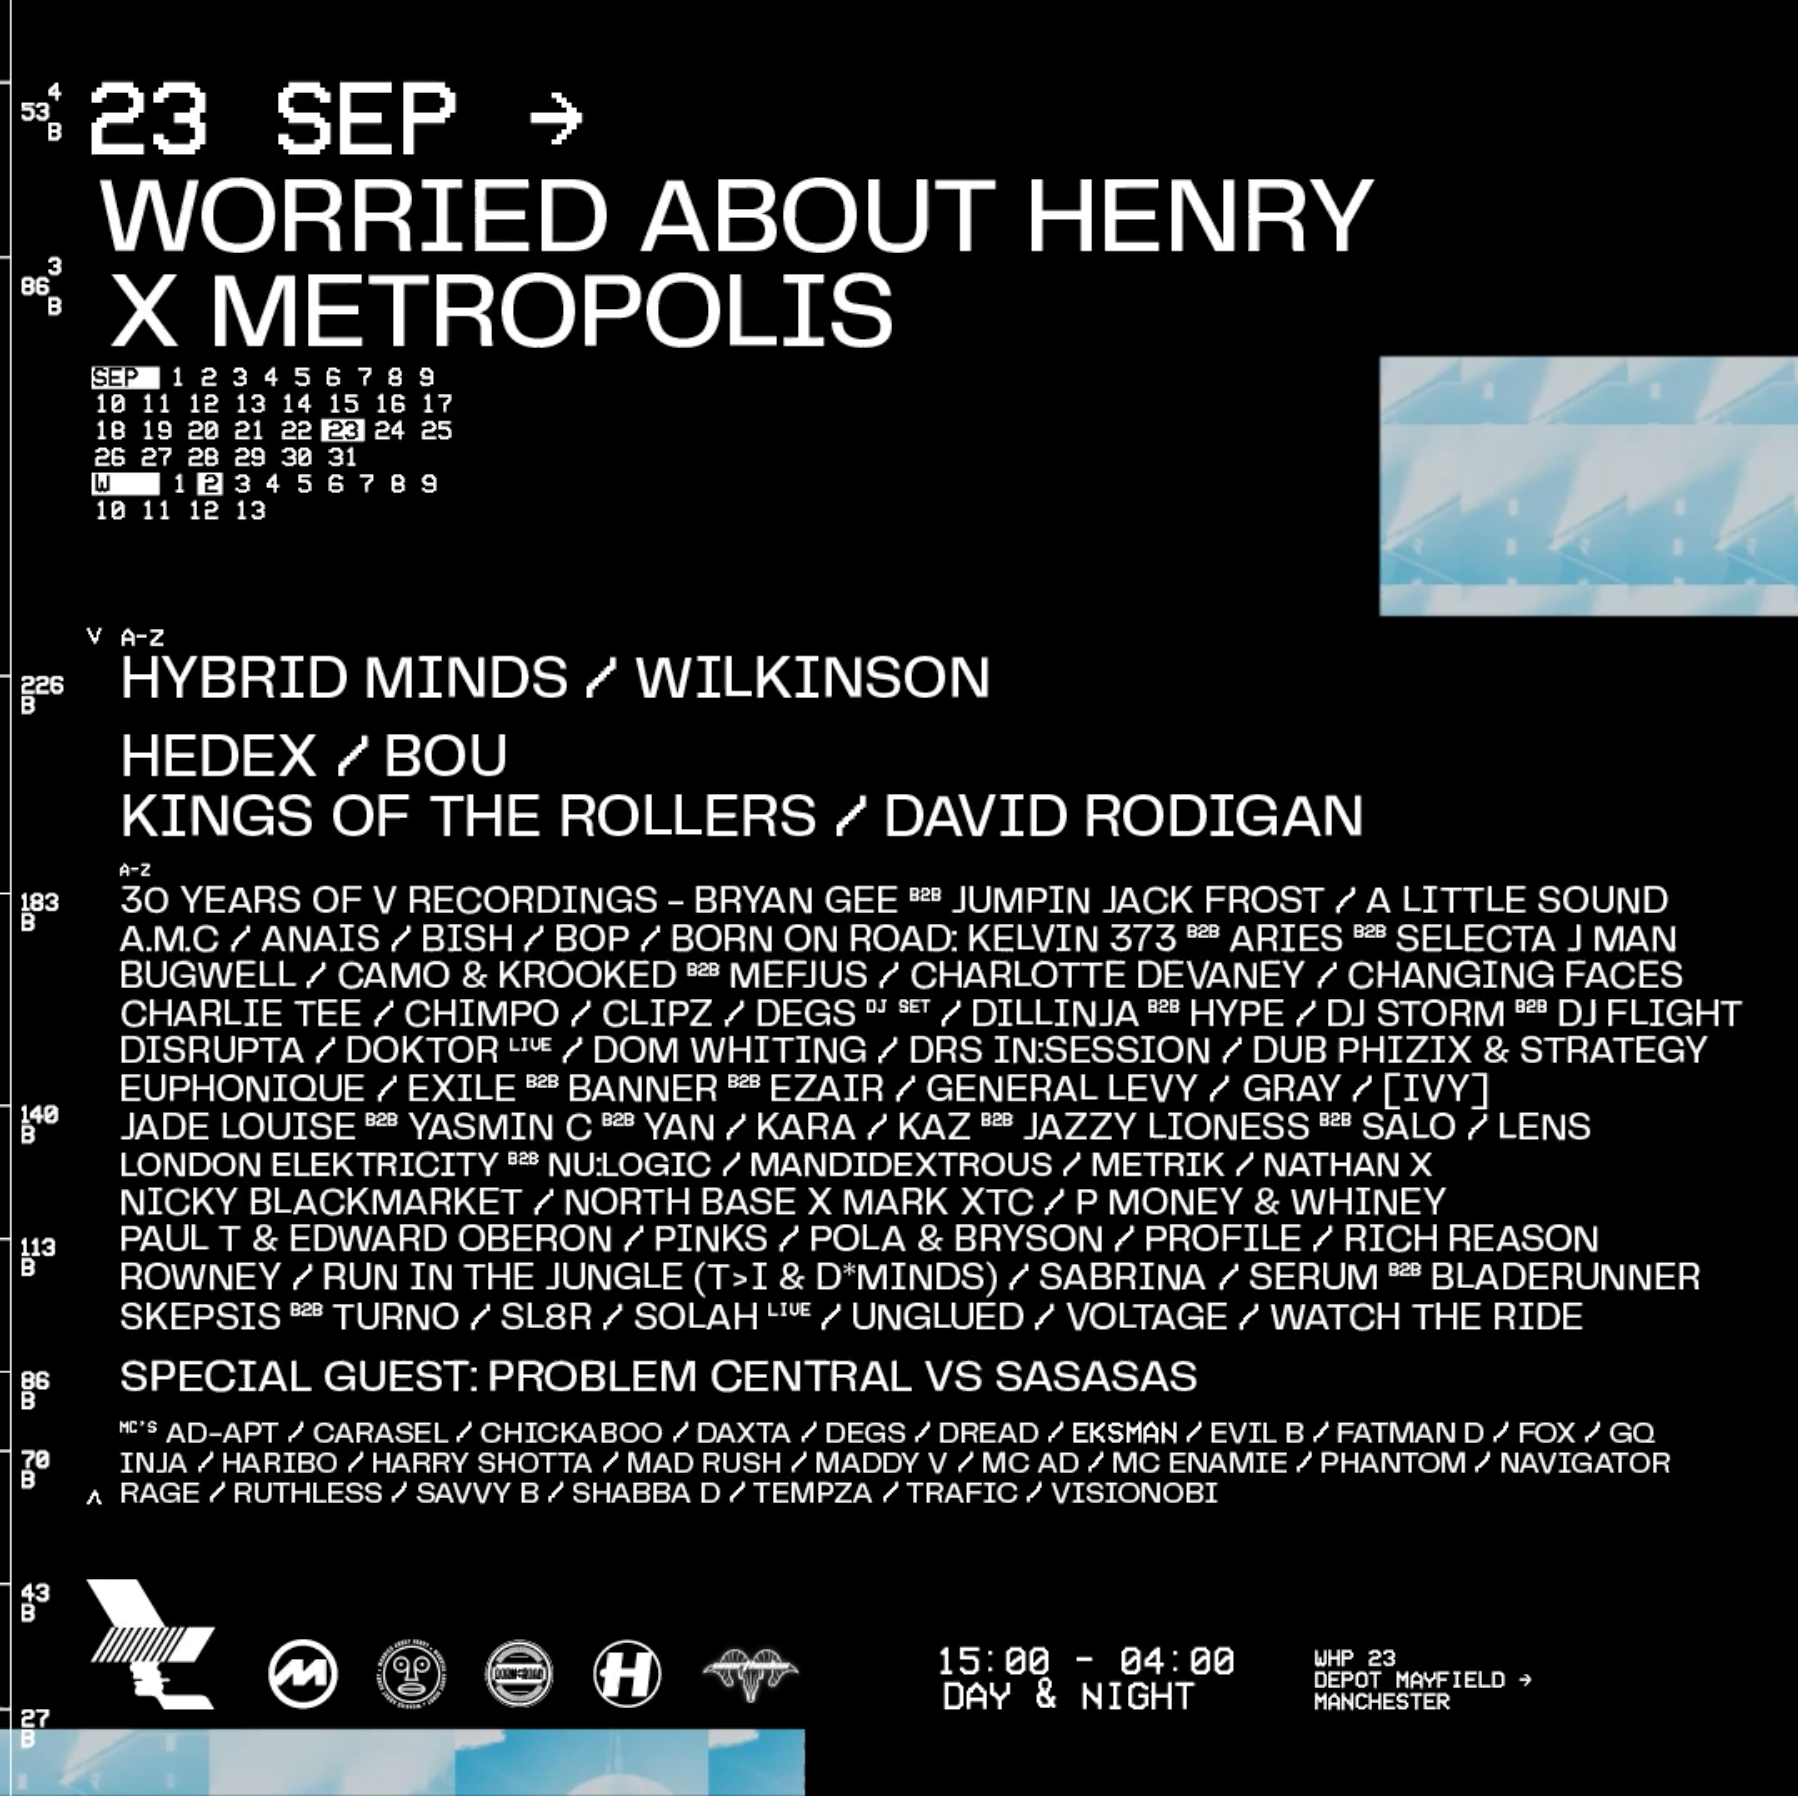 Worried About Henry x Metropolis - フライヤー表